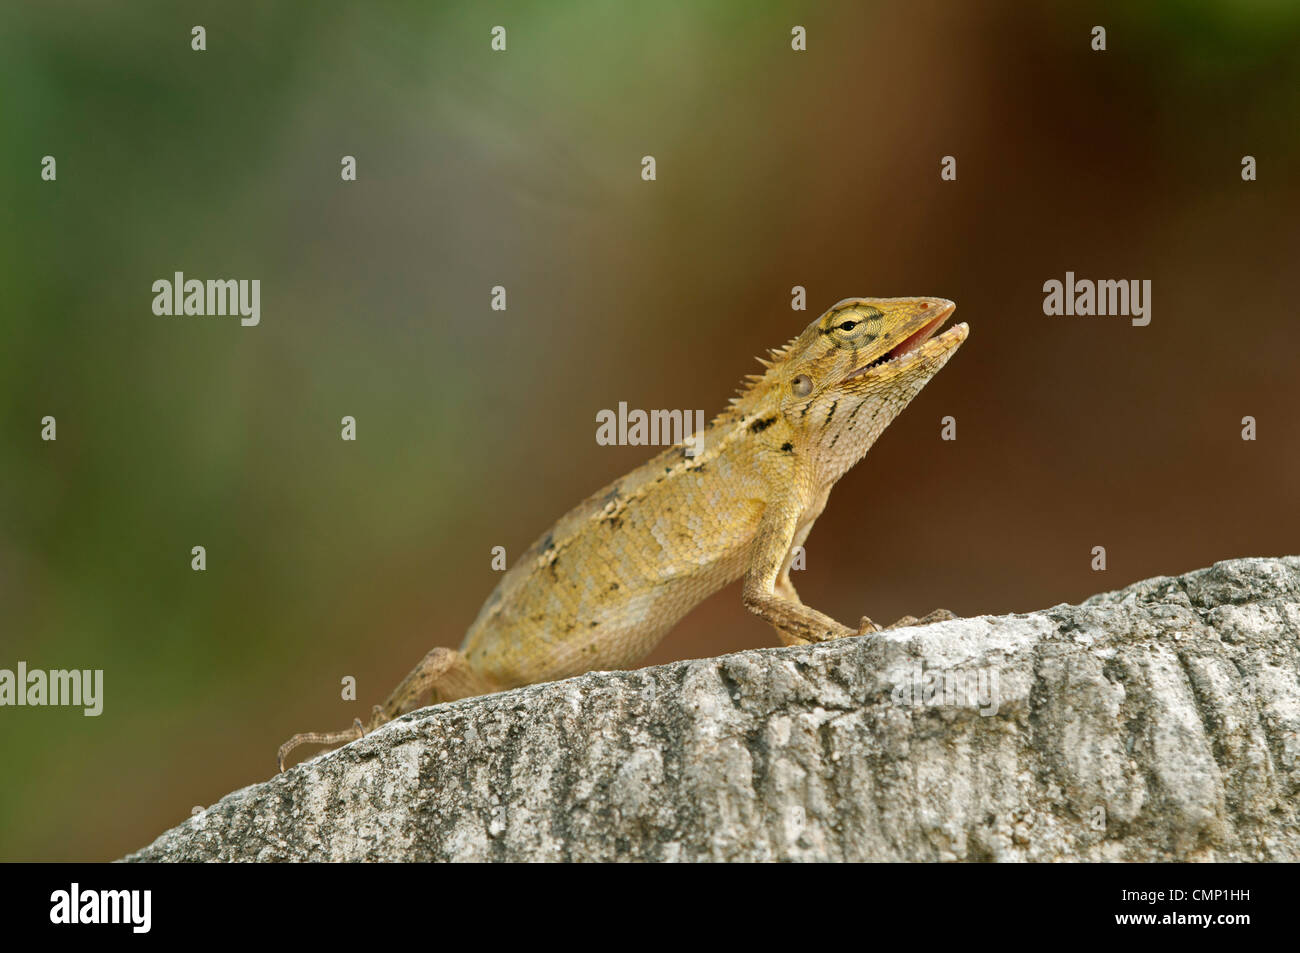 Changable lizard, Calotes versicolor, female with typical yellowish-brown colour, Thailand Stock Photo